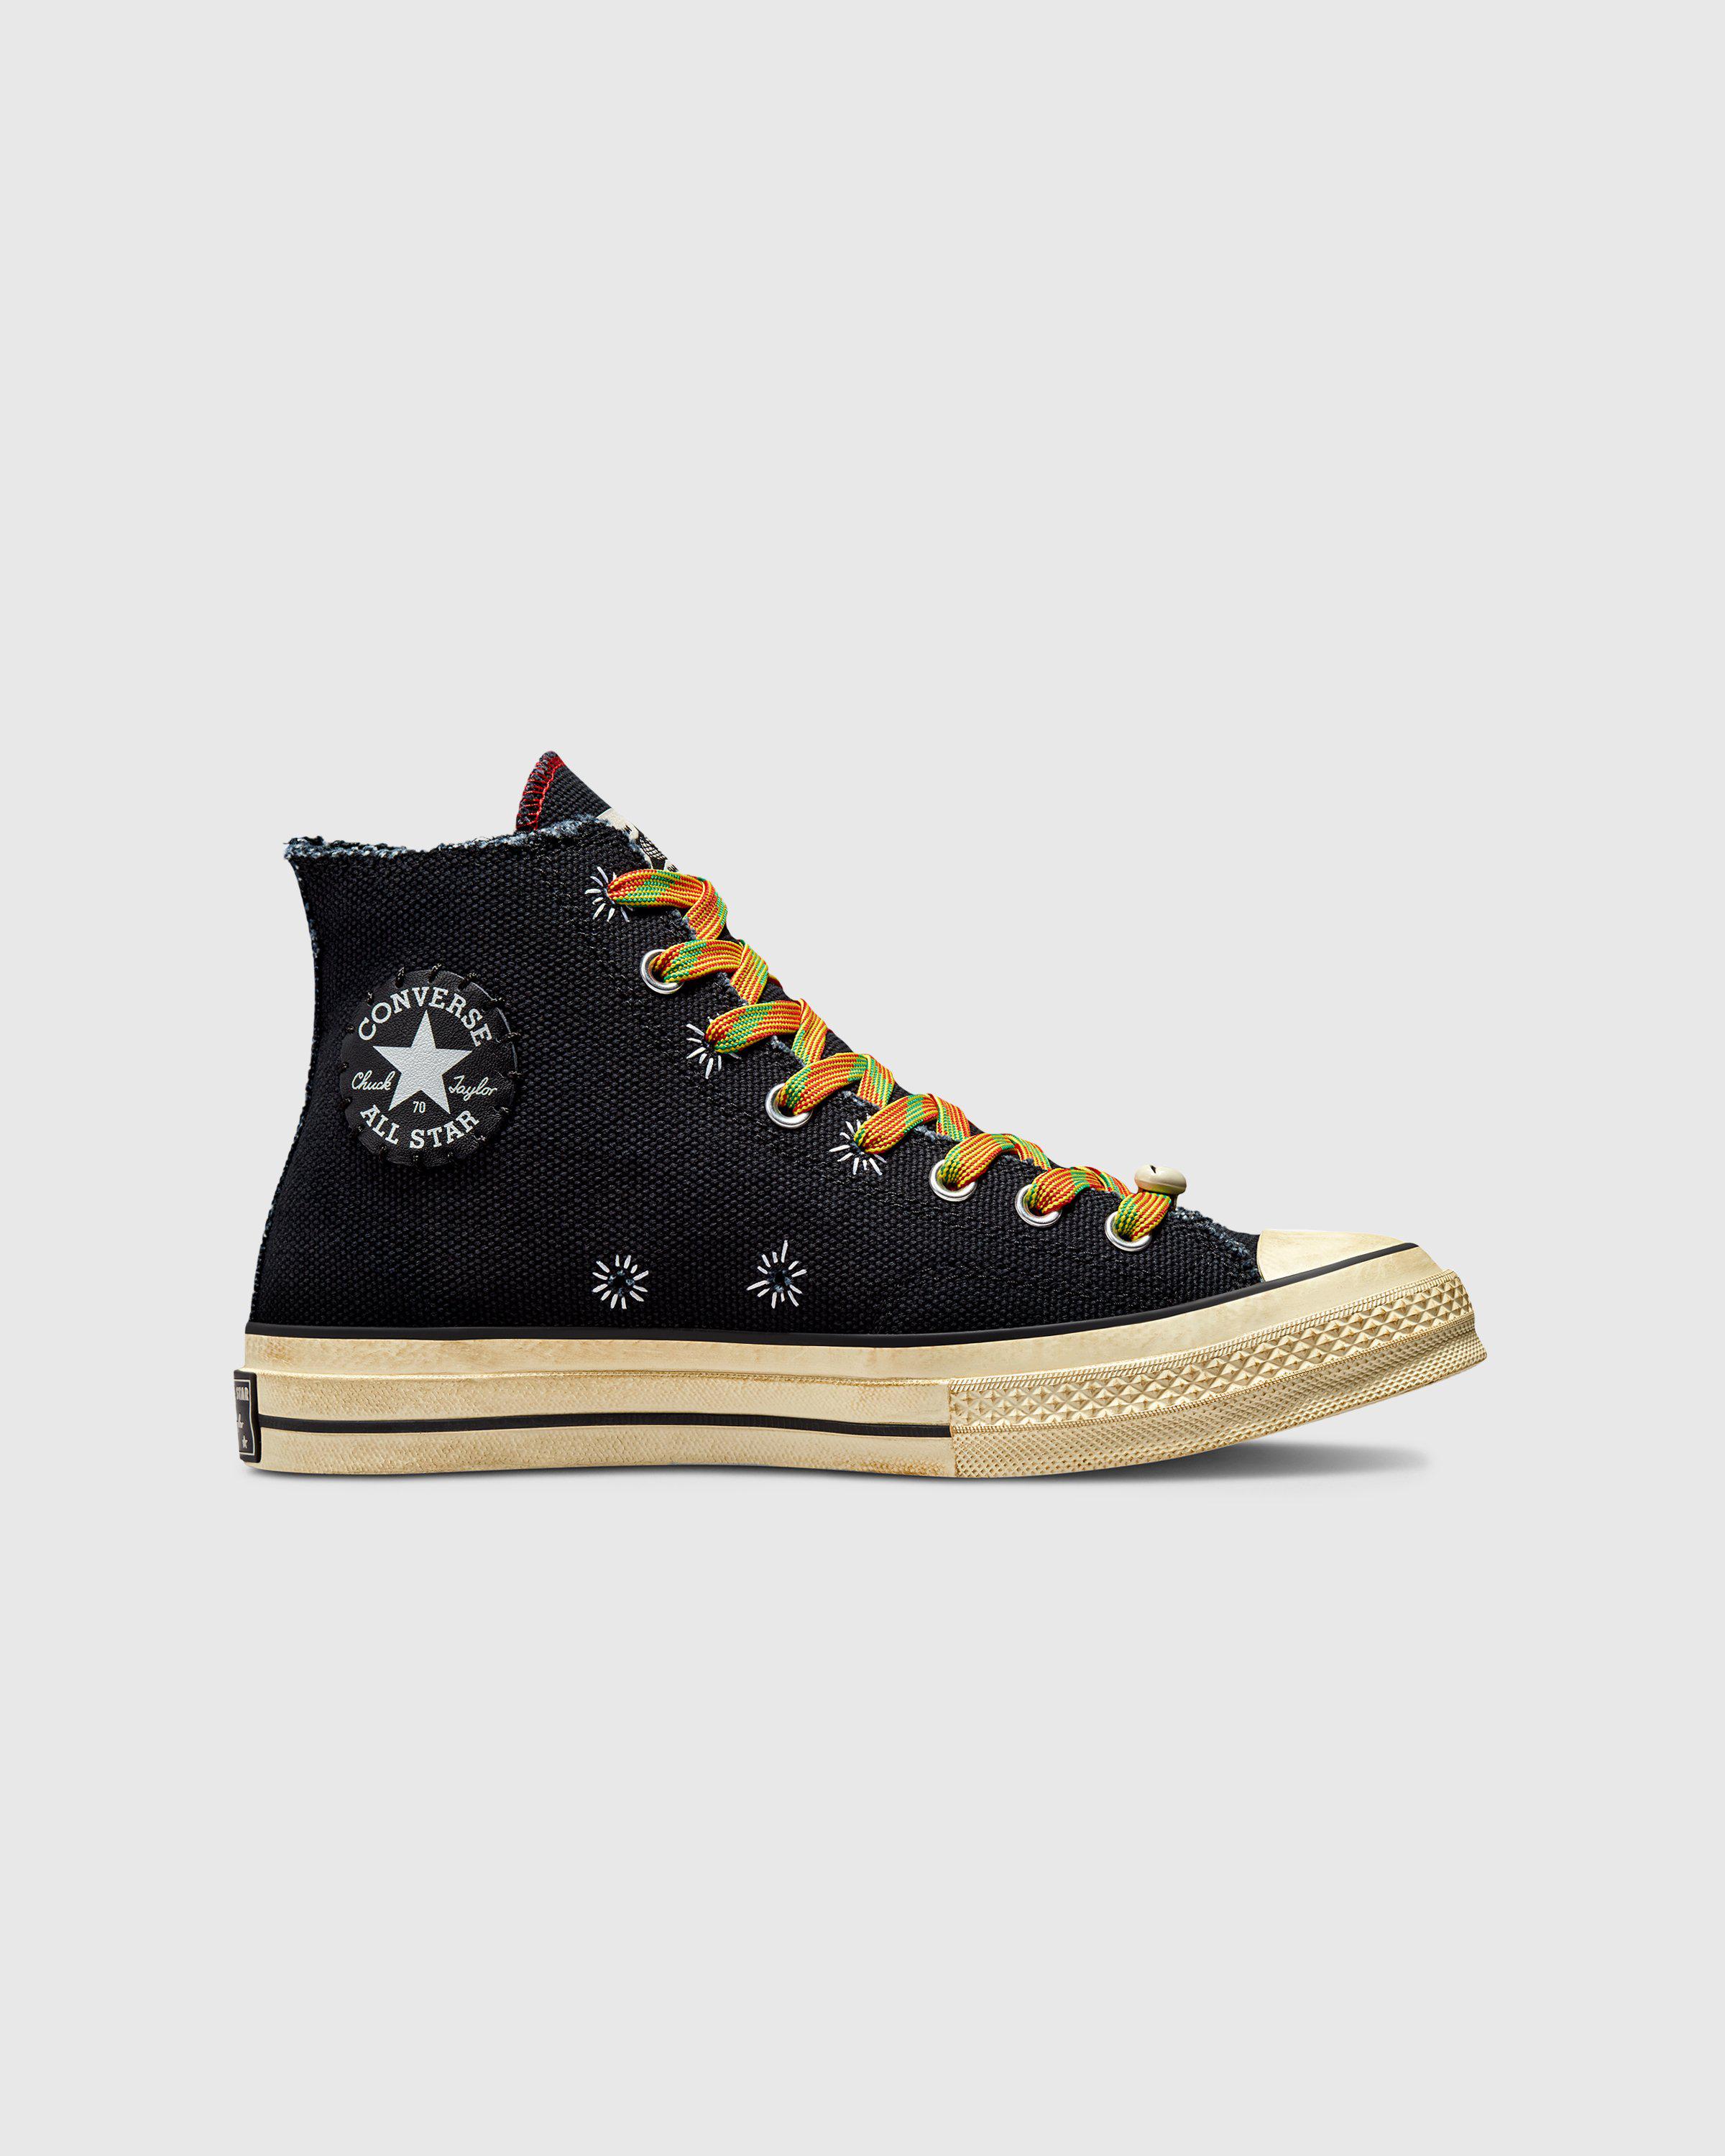 Converse x Barriers – Chuck 70 Hi Black/Fiery Red by CONVERSE X BARRIERS